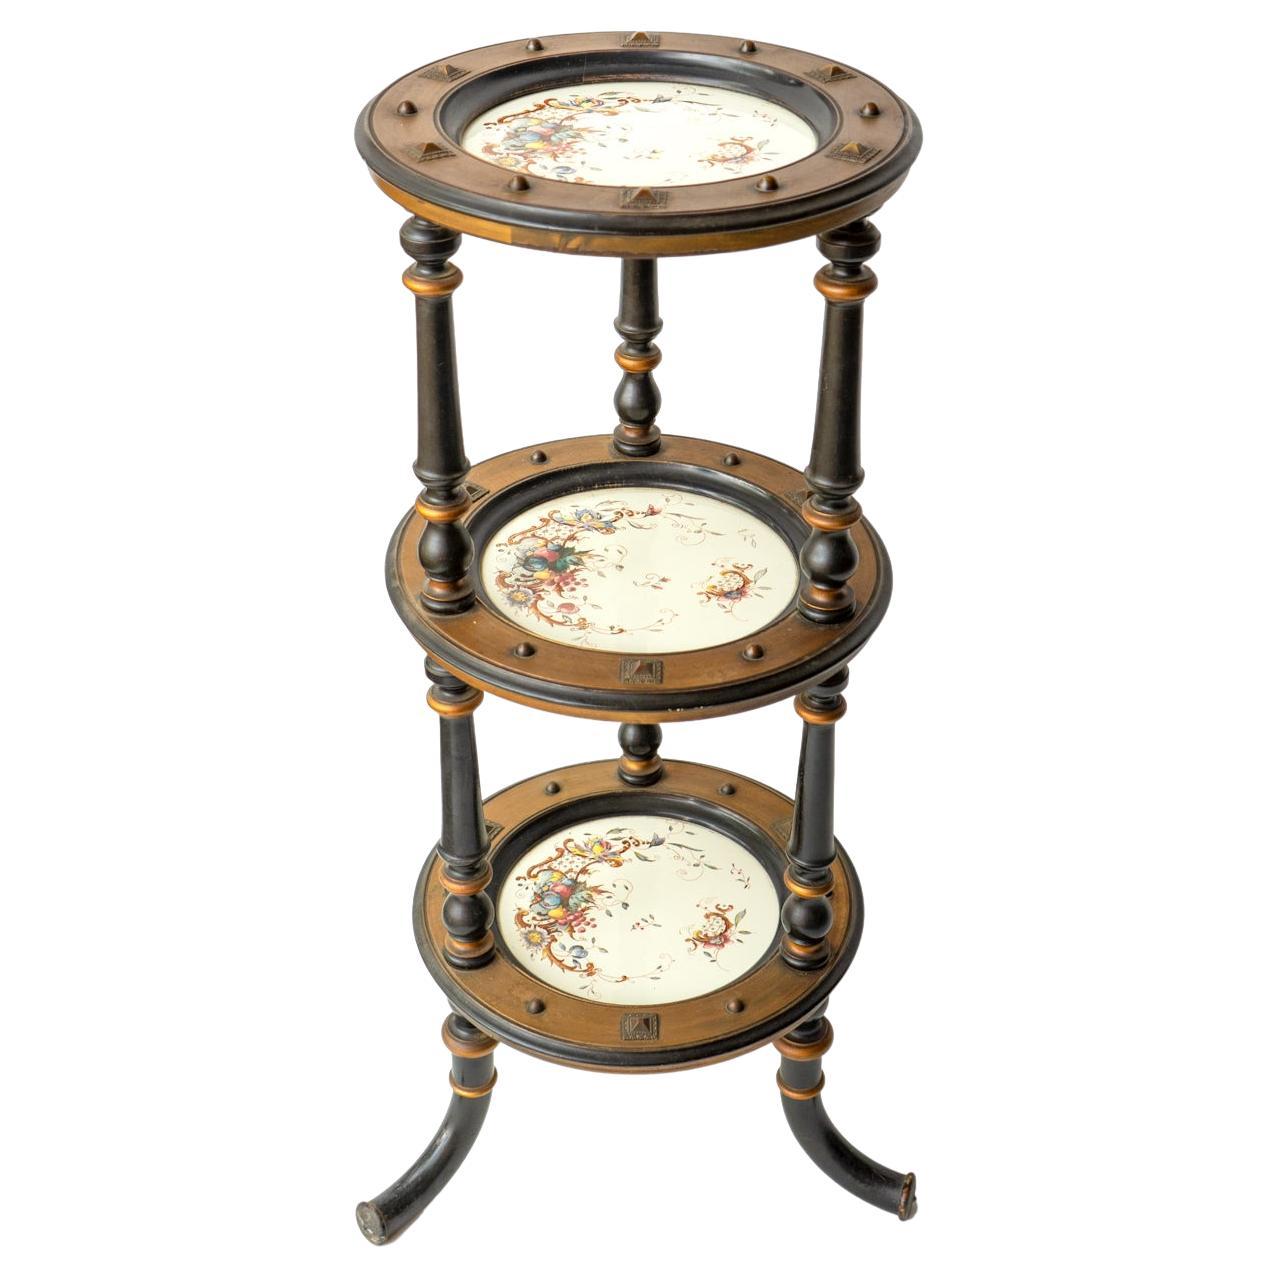 Aesthetic Movement Three Tiered Cake Stand, 19th Century Victorian cake display For Sale